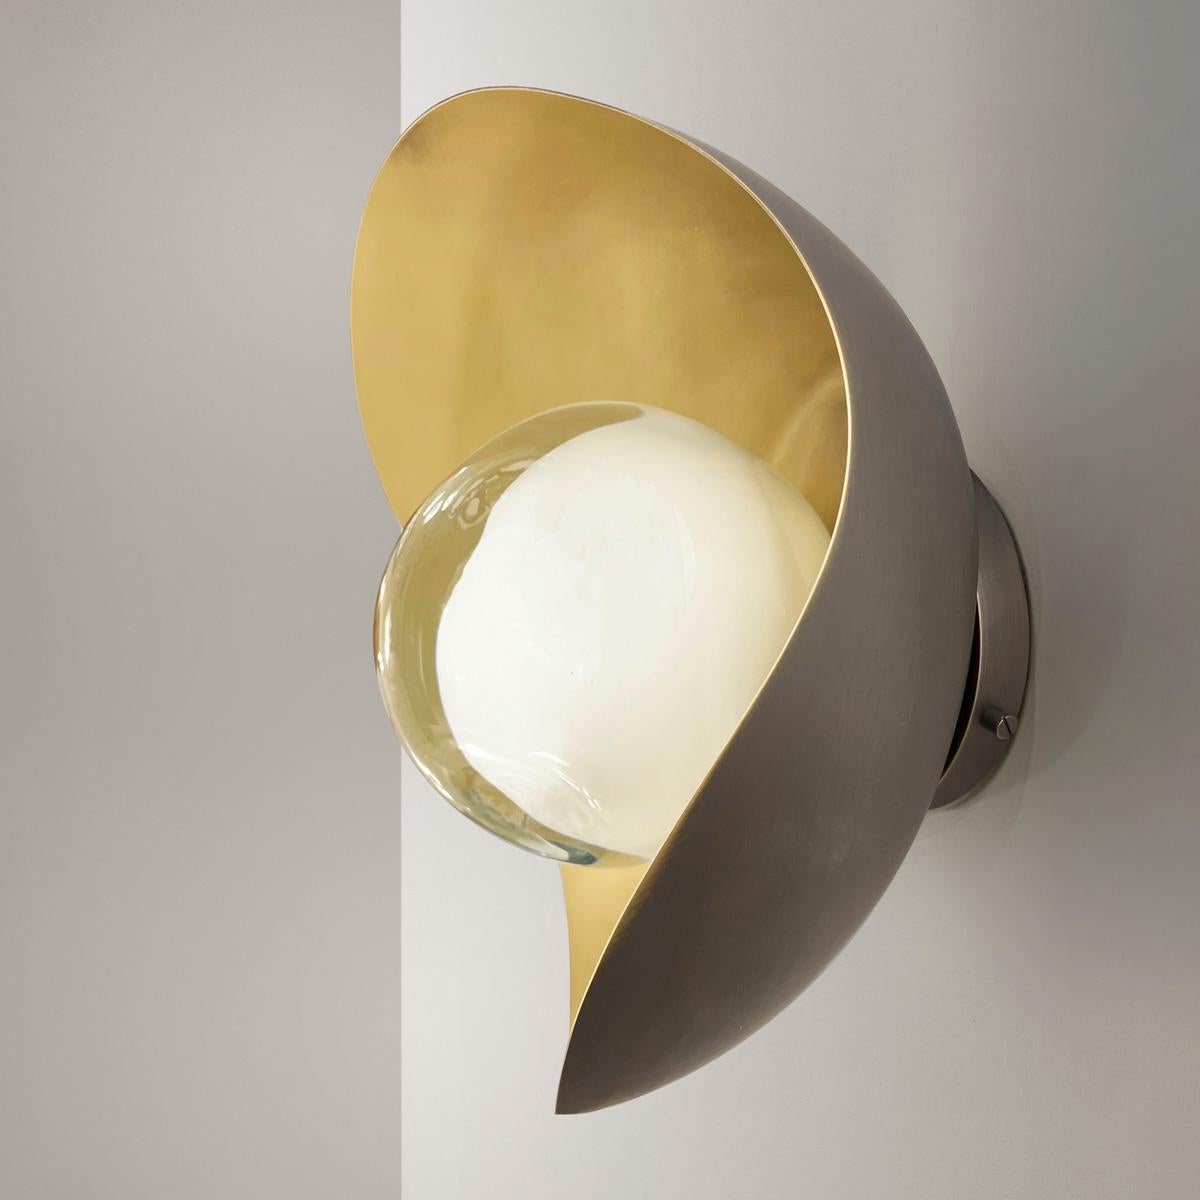 Perla Wall Light by Gaspare Asaro-Satin Brass/Polished Nickel Finish For Sale 3